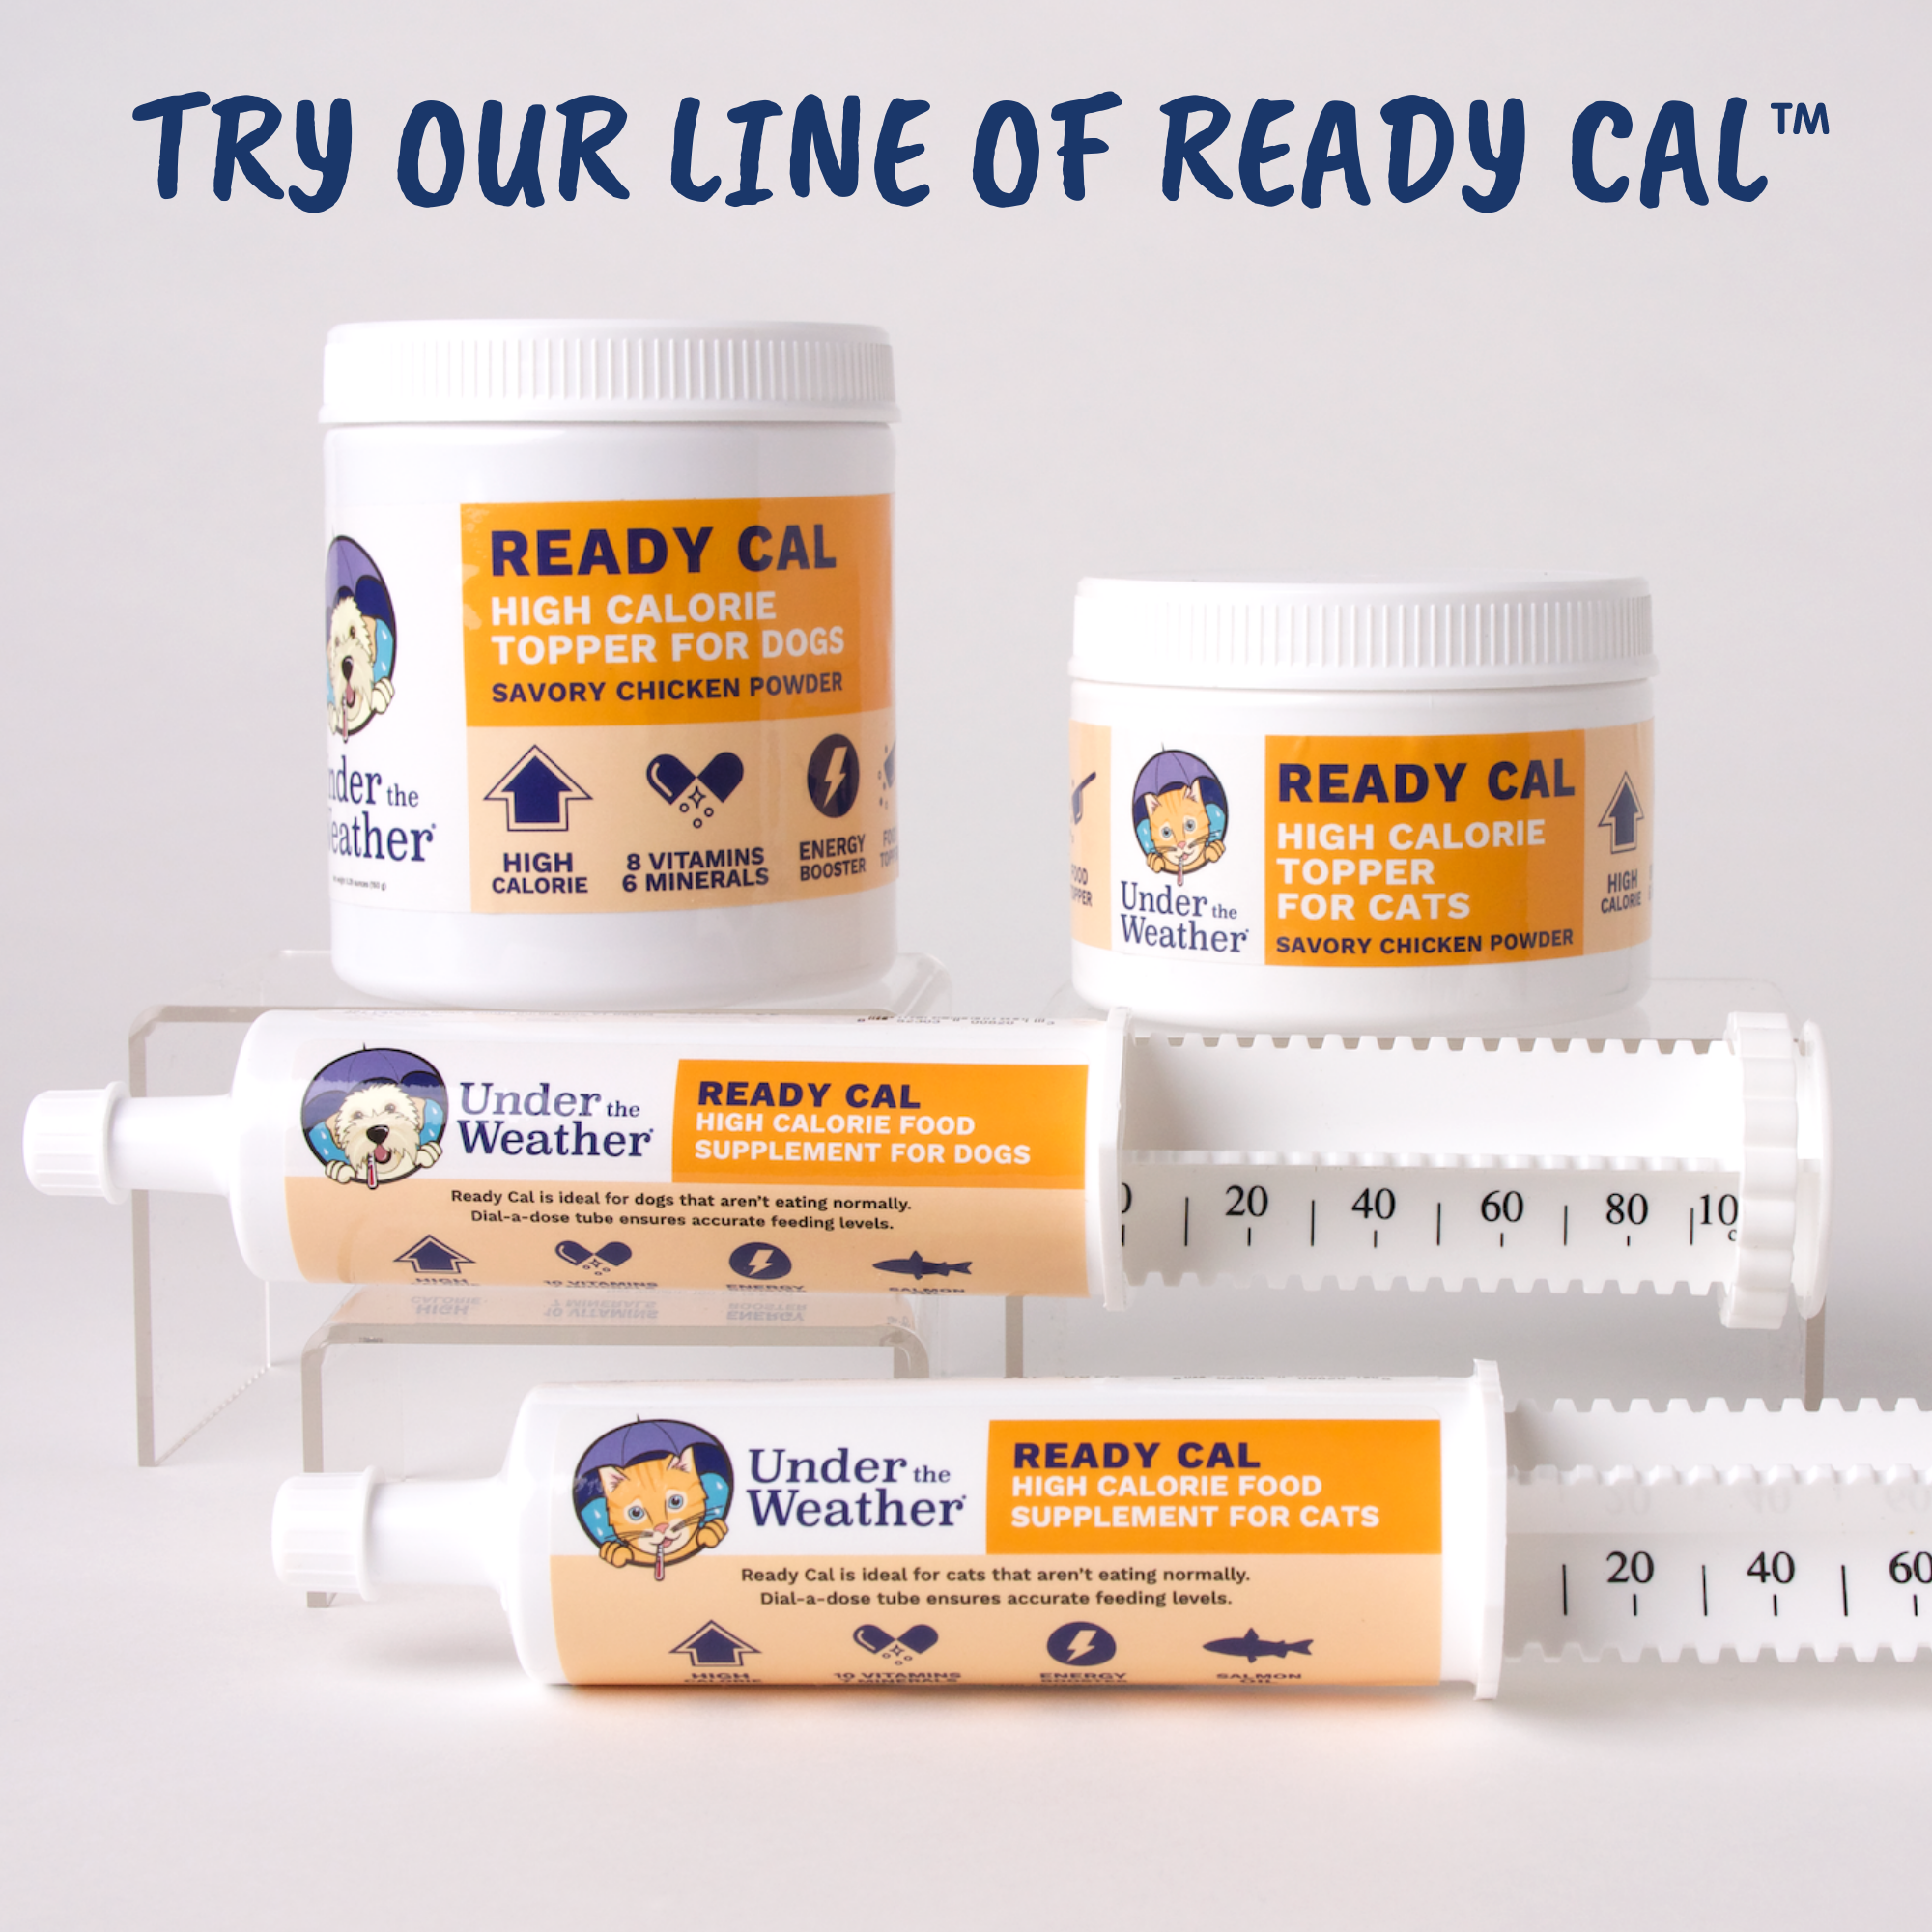 Ready Cal High Calorie Bundle for Dogs